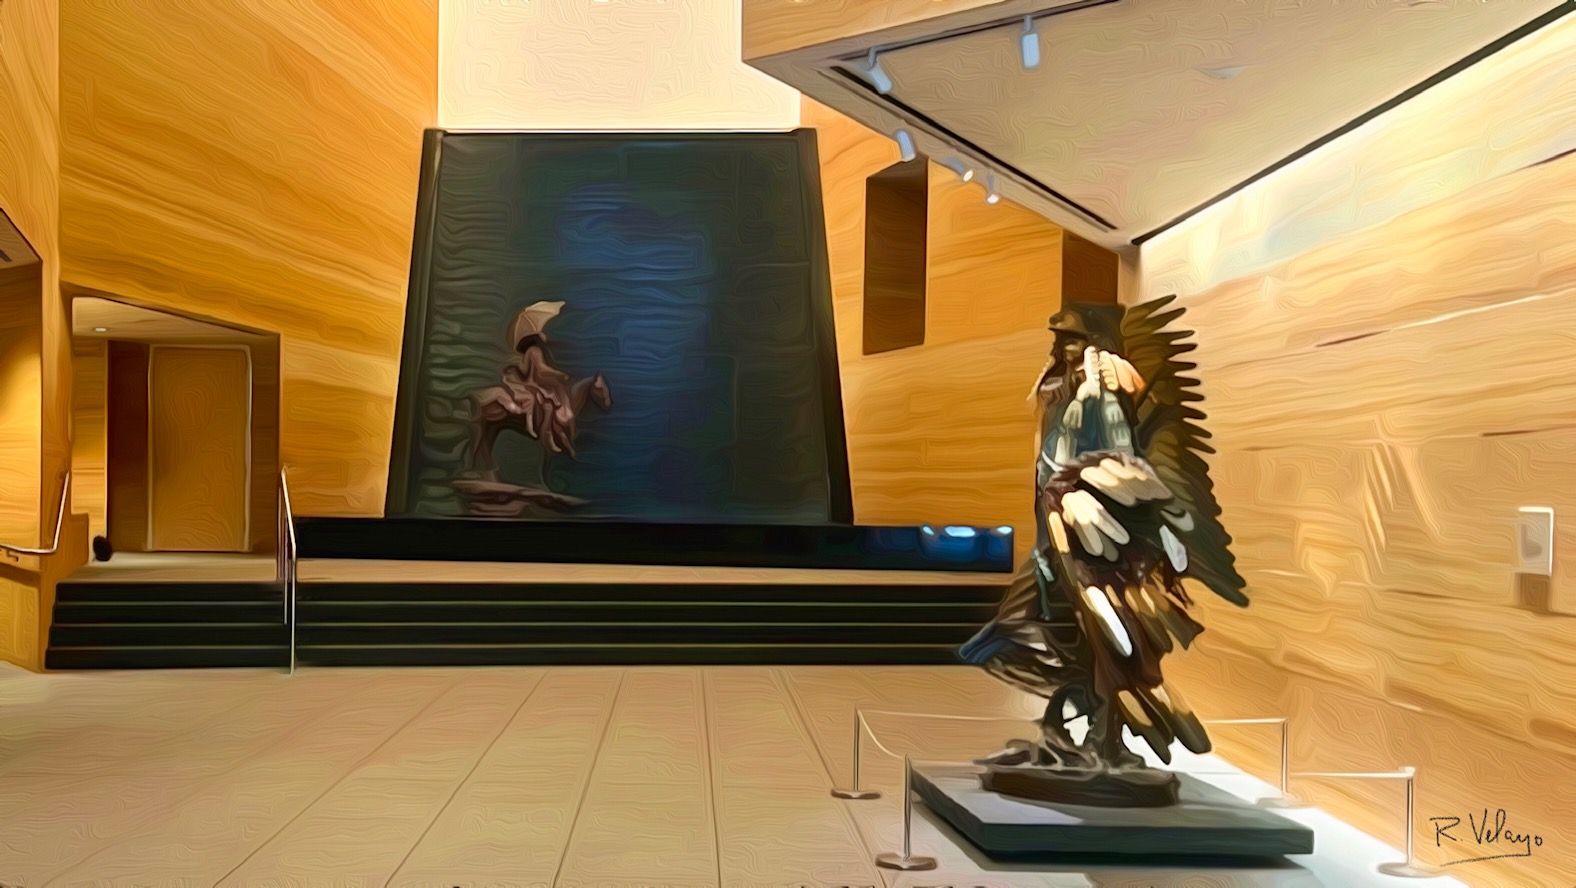 "WATERFALL SCULPTURE AT THE JAMES MUSEUM" [Created: 7/08/2022]